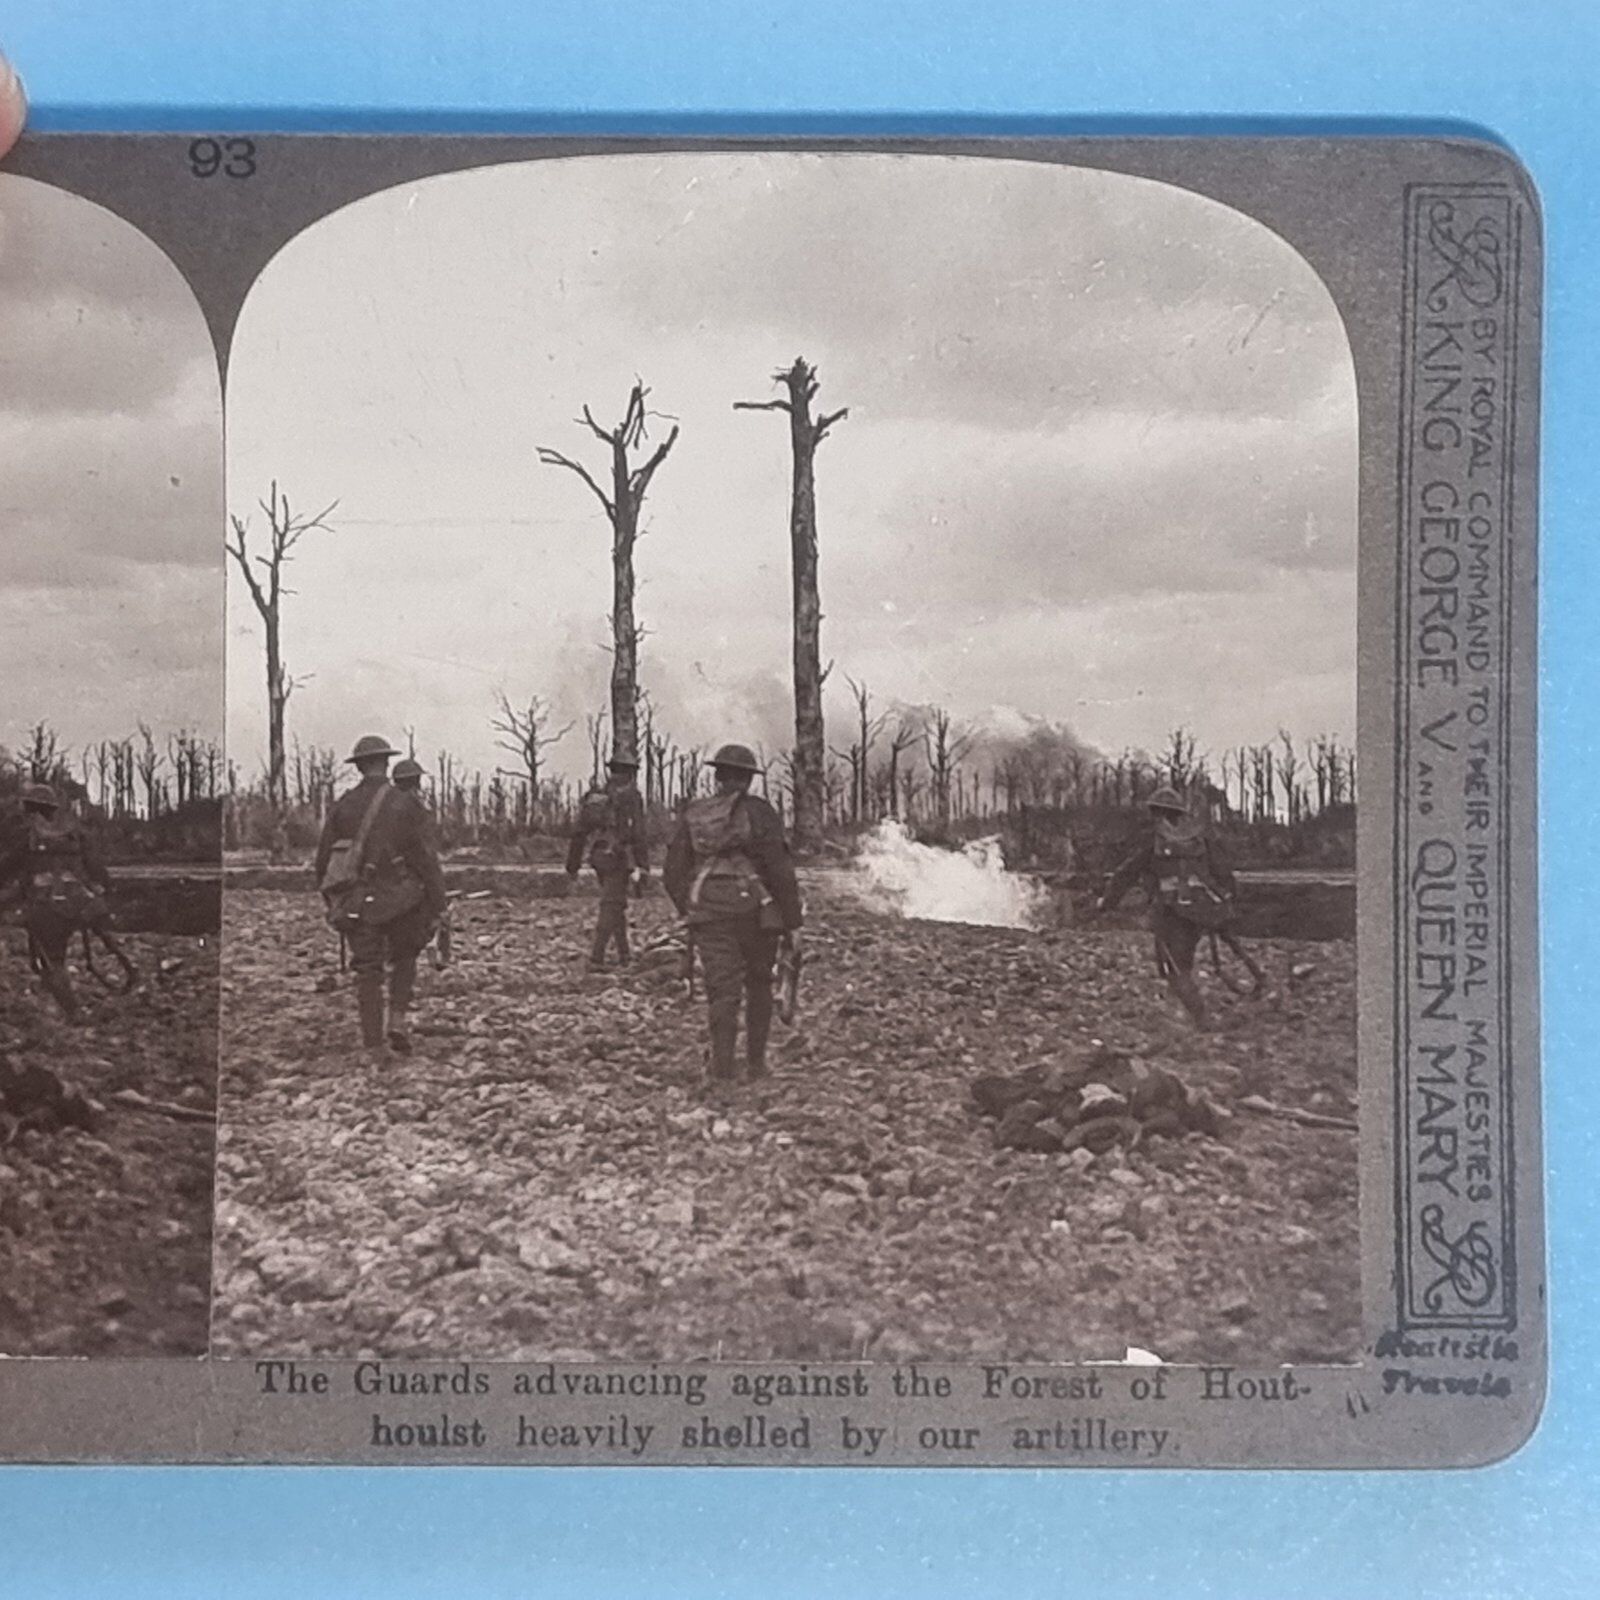 WW1 Stereoview 3D RP Card C1916 Belgium Ypres Houthoulst Forest Post Bombardment